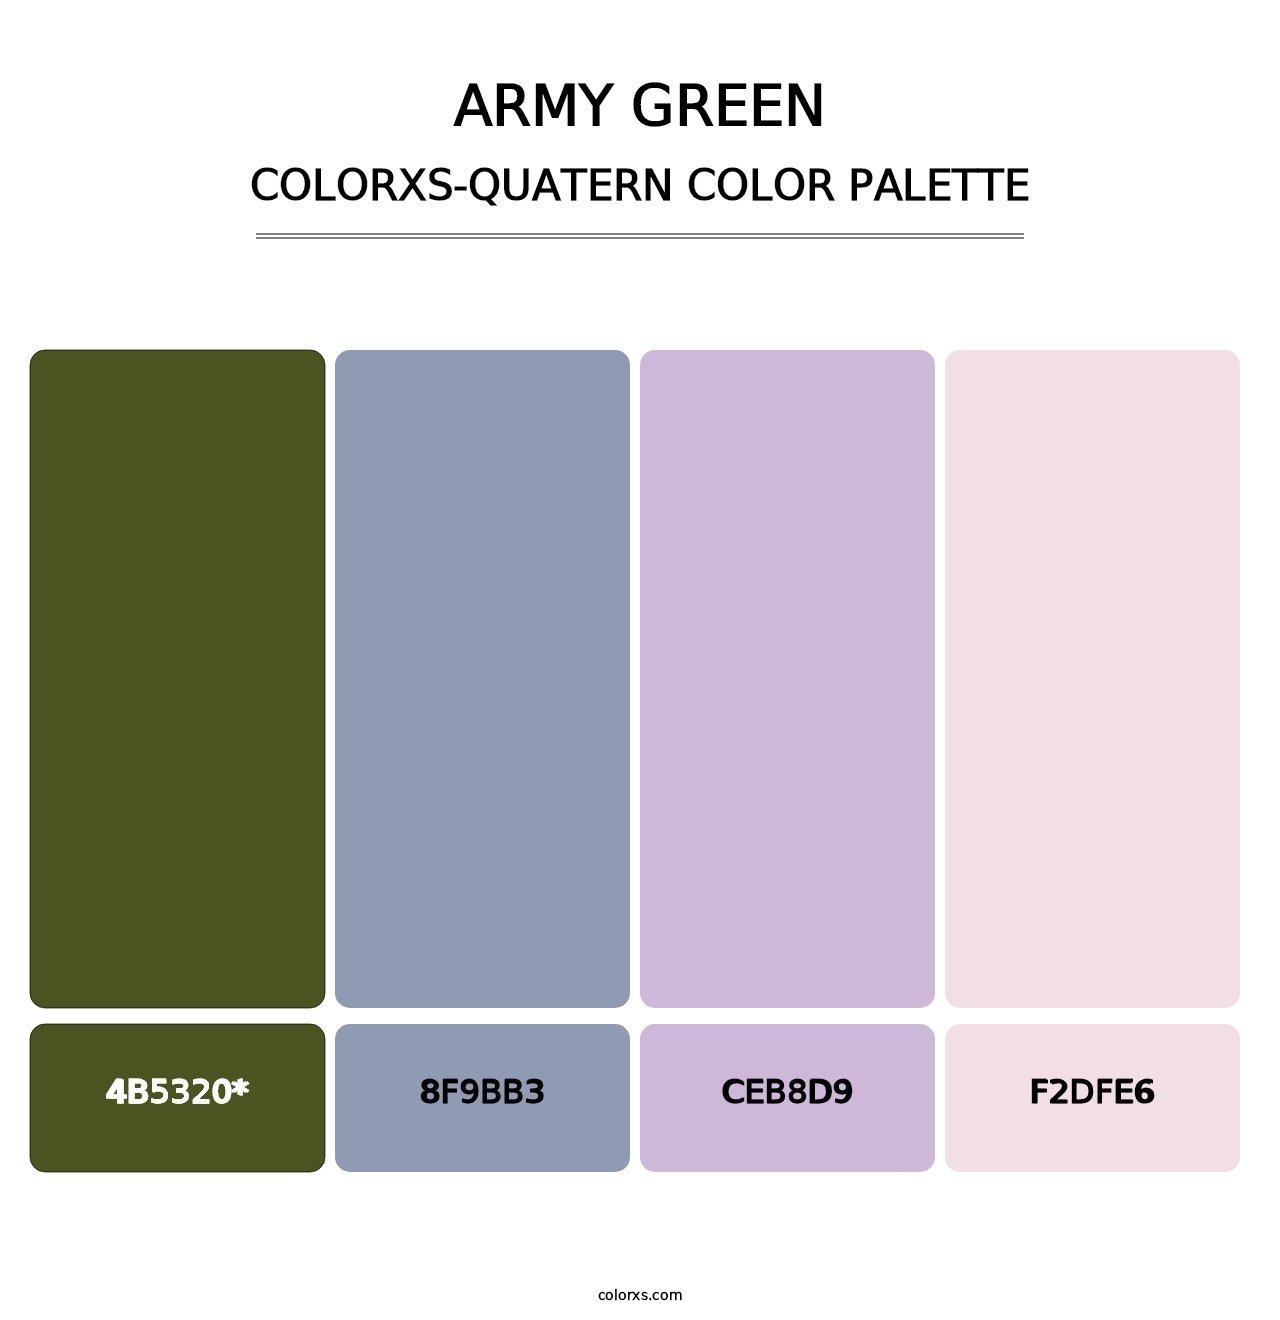 Army Green - Colorxs Quad Palette